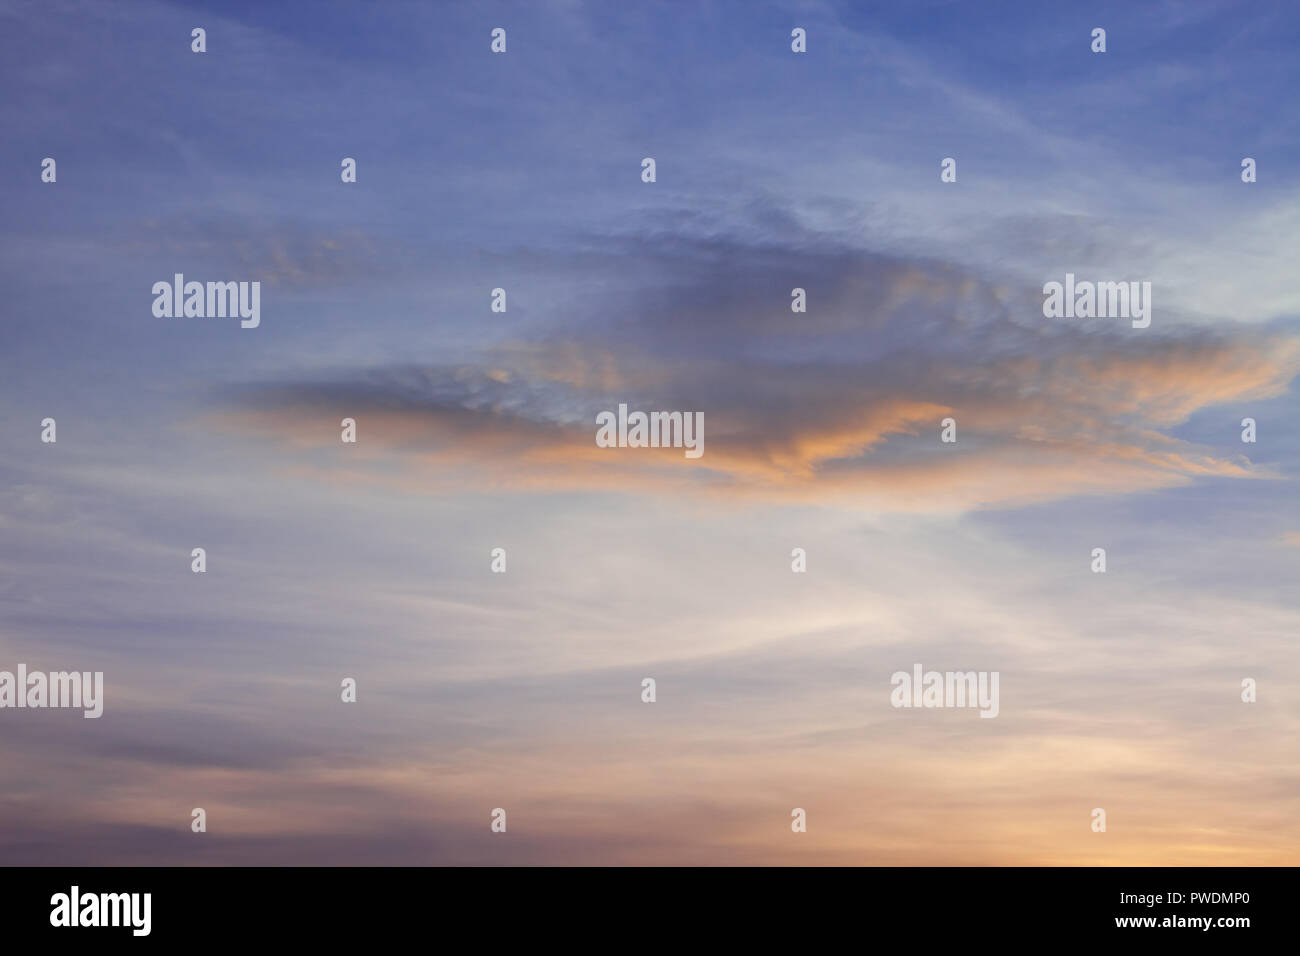 sky background with nice clouds on bright blue sky Stock Photo